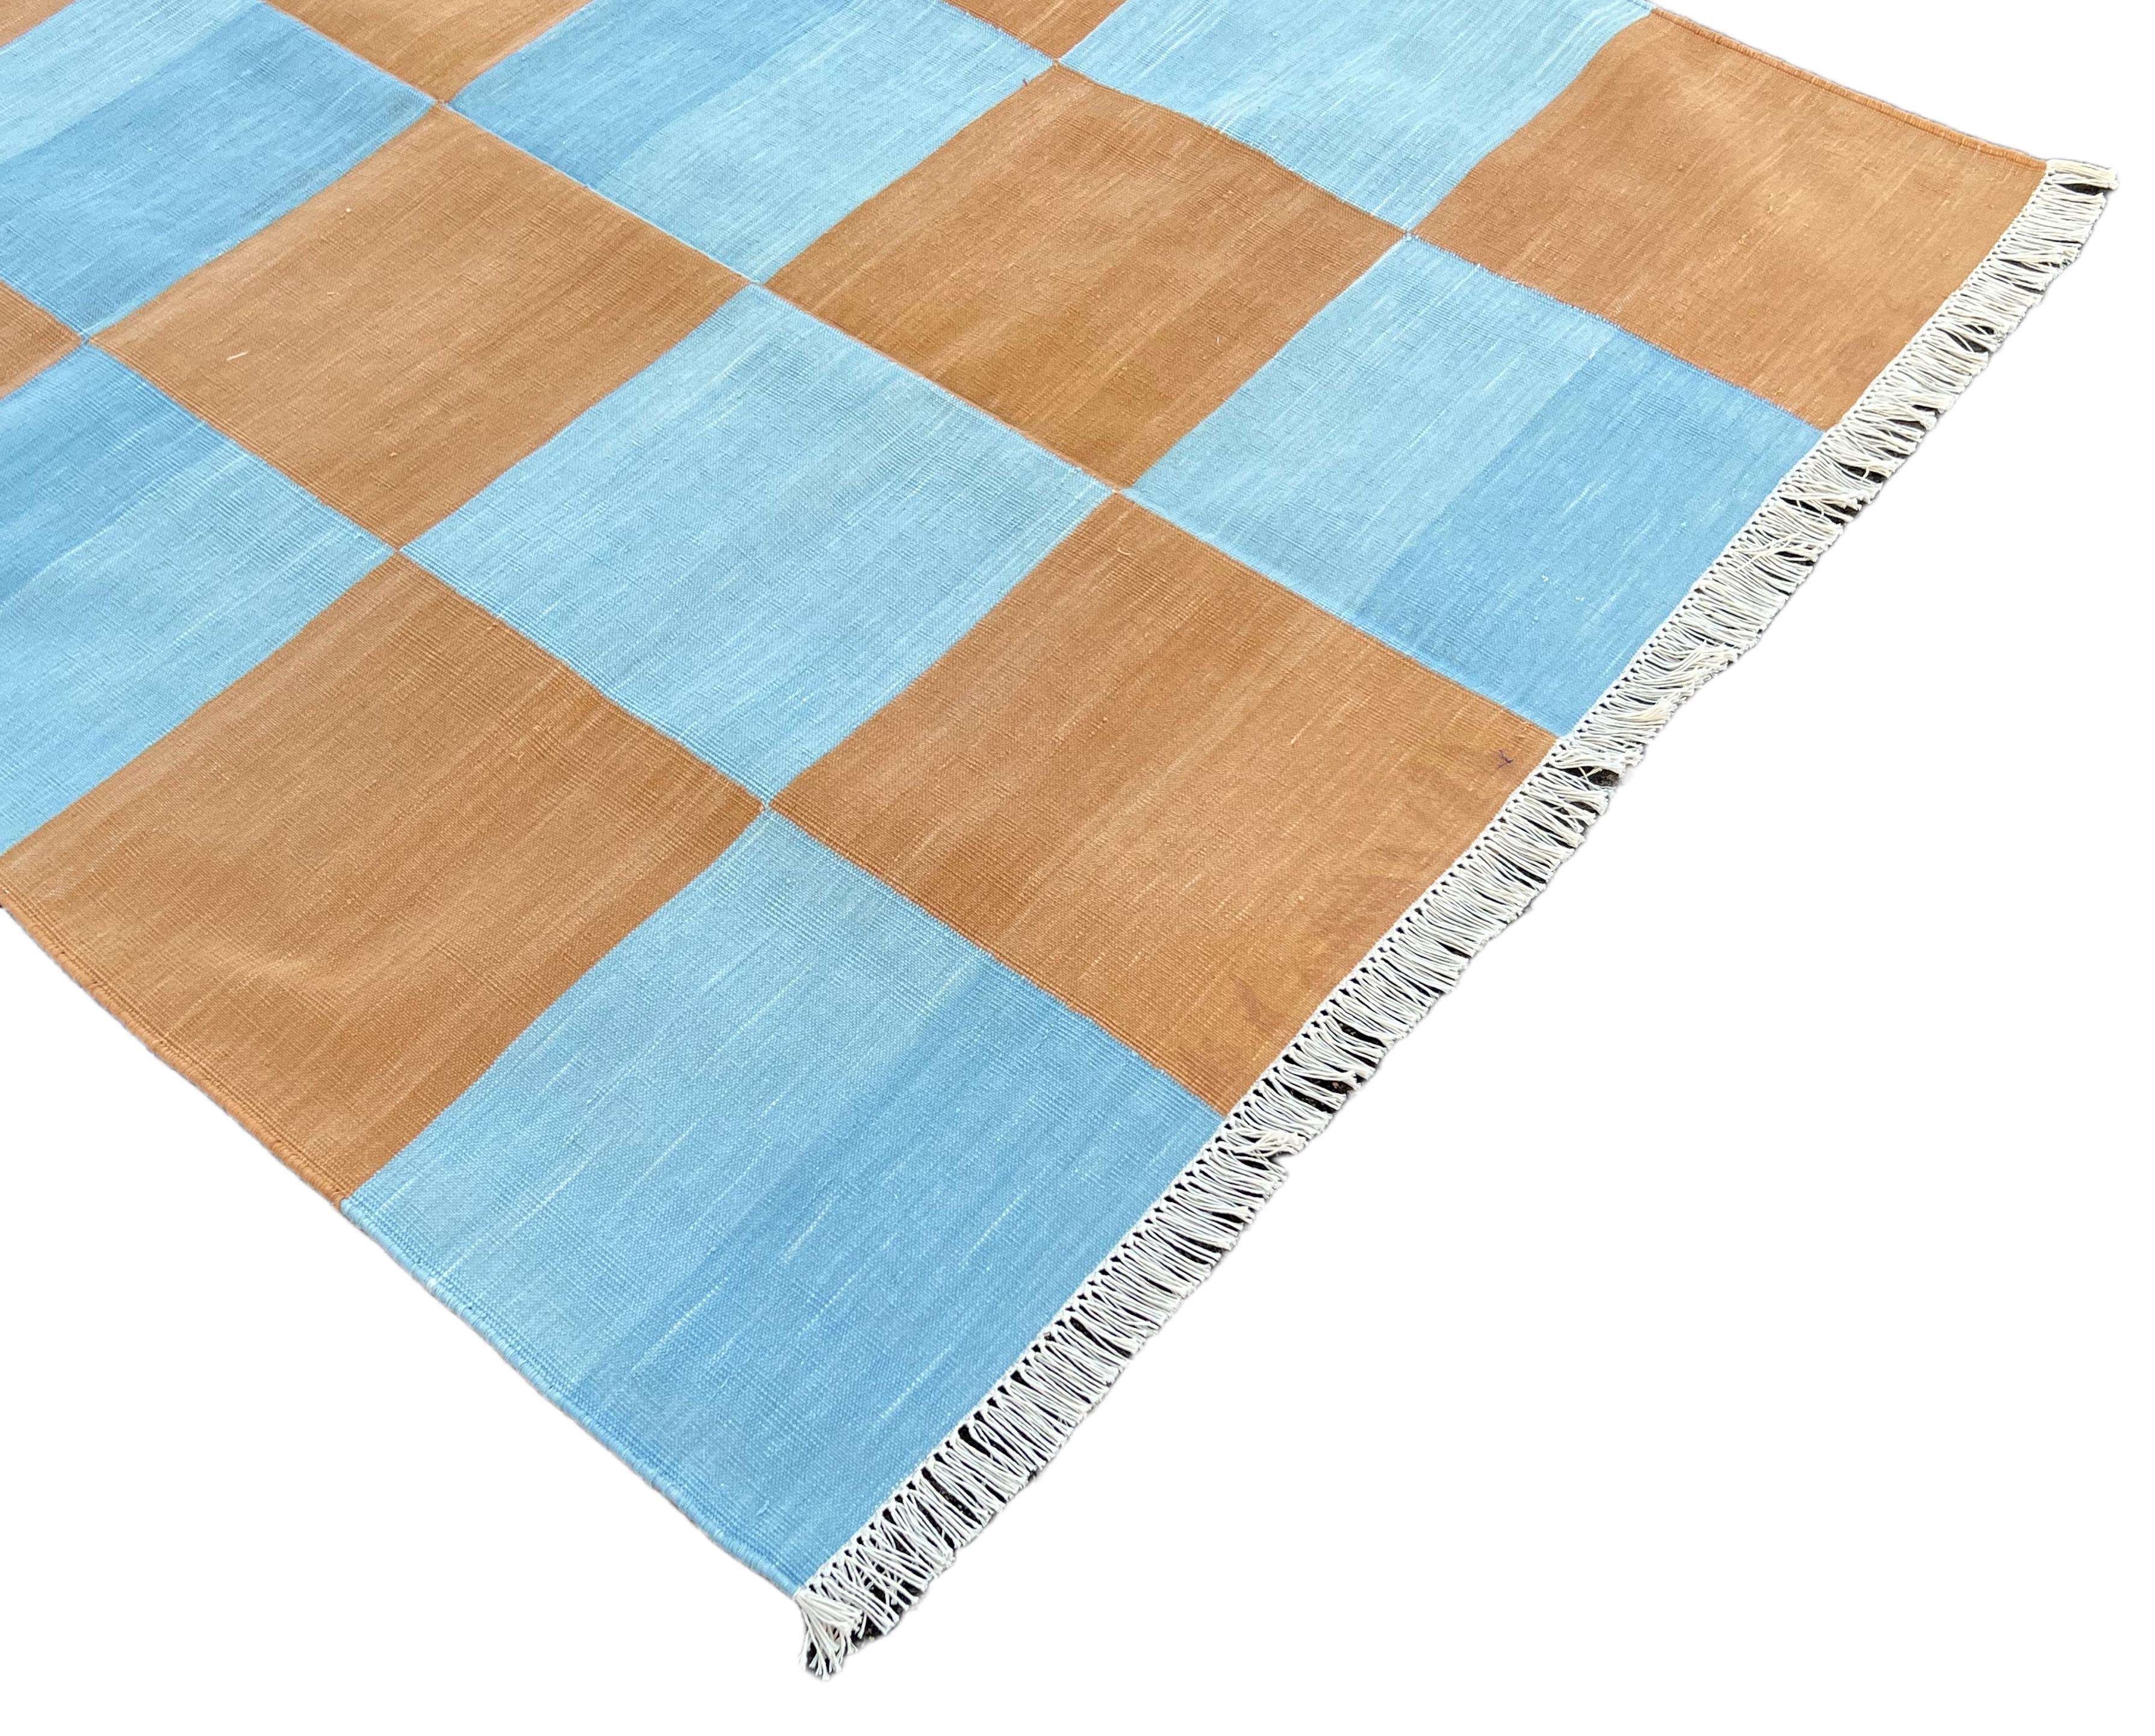 Hand-Woven Handmade Cotton Area Flat Weave Rug, 4x6 Blue And Tan Checked Indian Dhurrie Rug For Sale